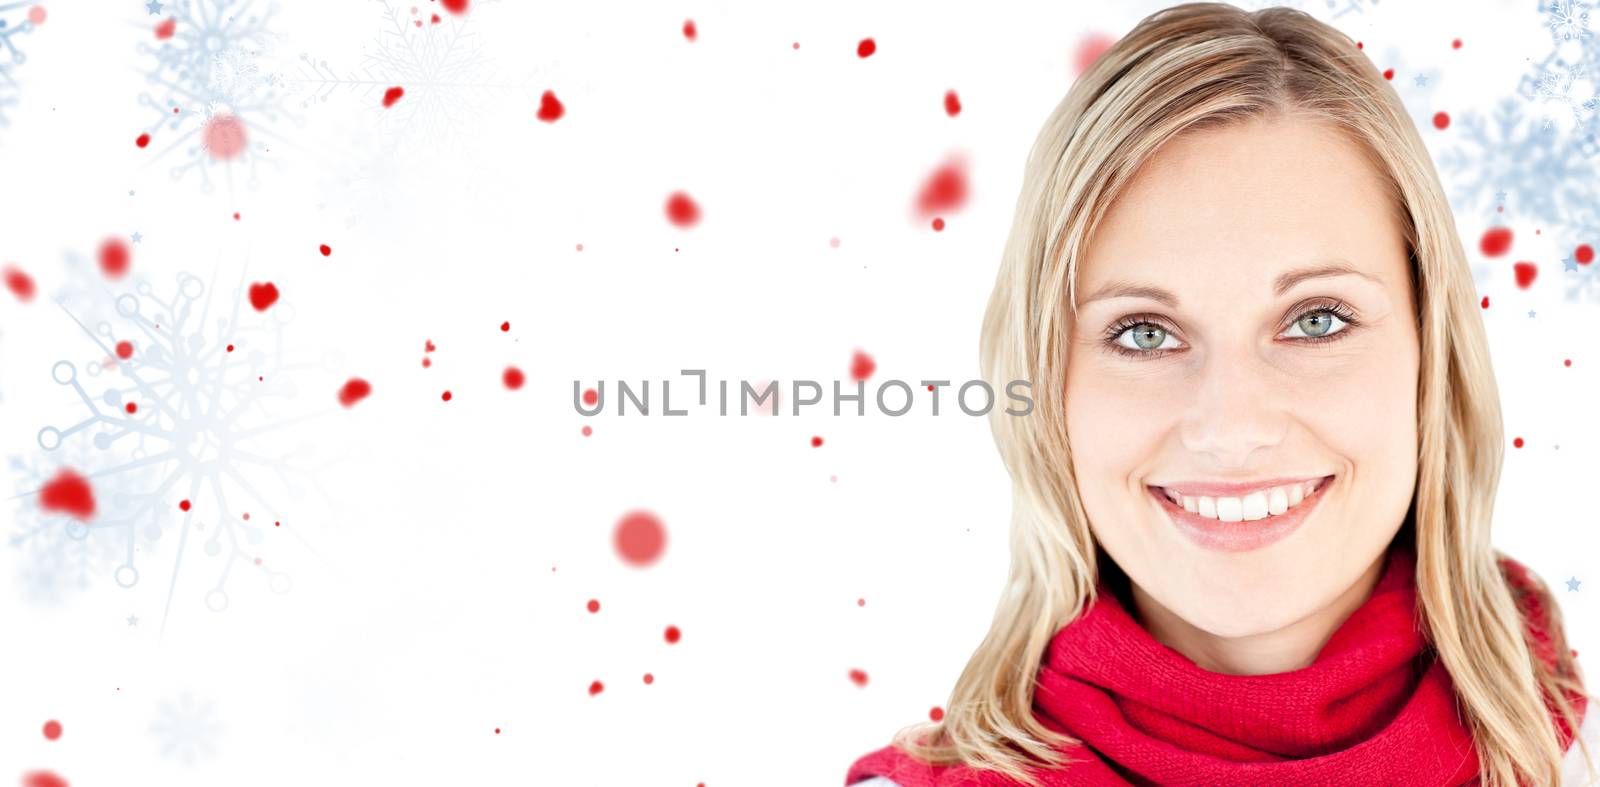 Portrait of a beautiful woman with a red scarf smiling at the camera against snowflake pattern